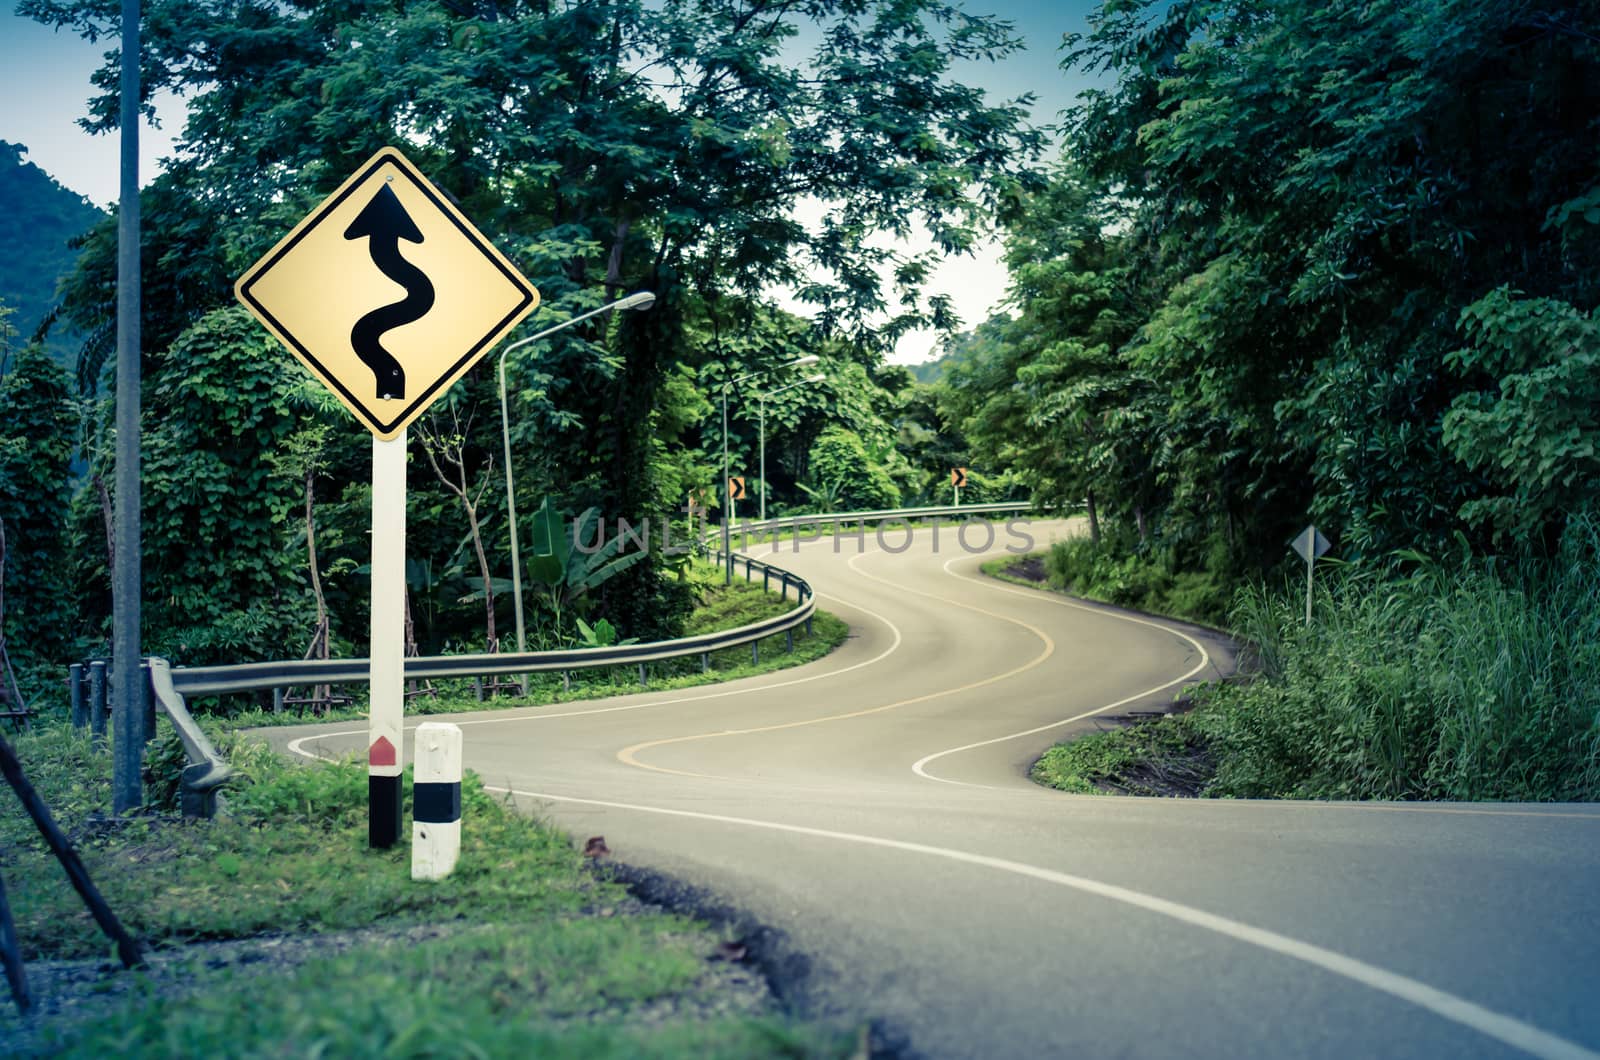 Snake curved road and warning sign by Kankliang